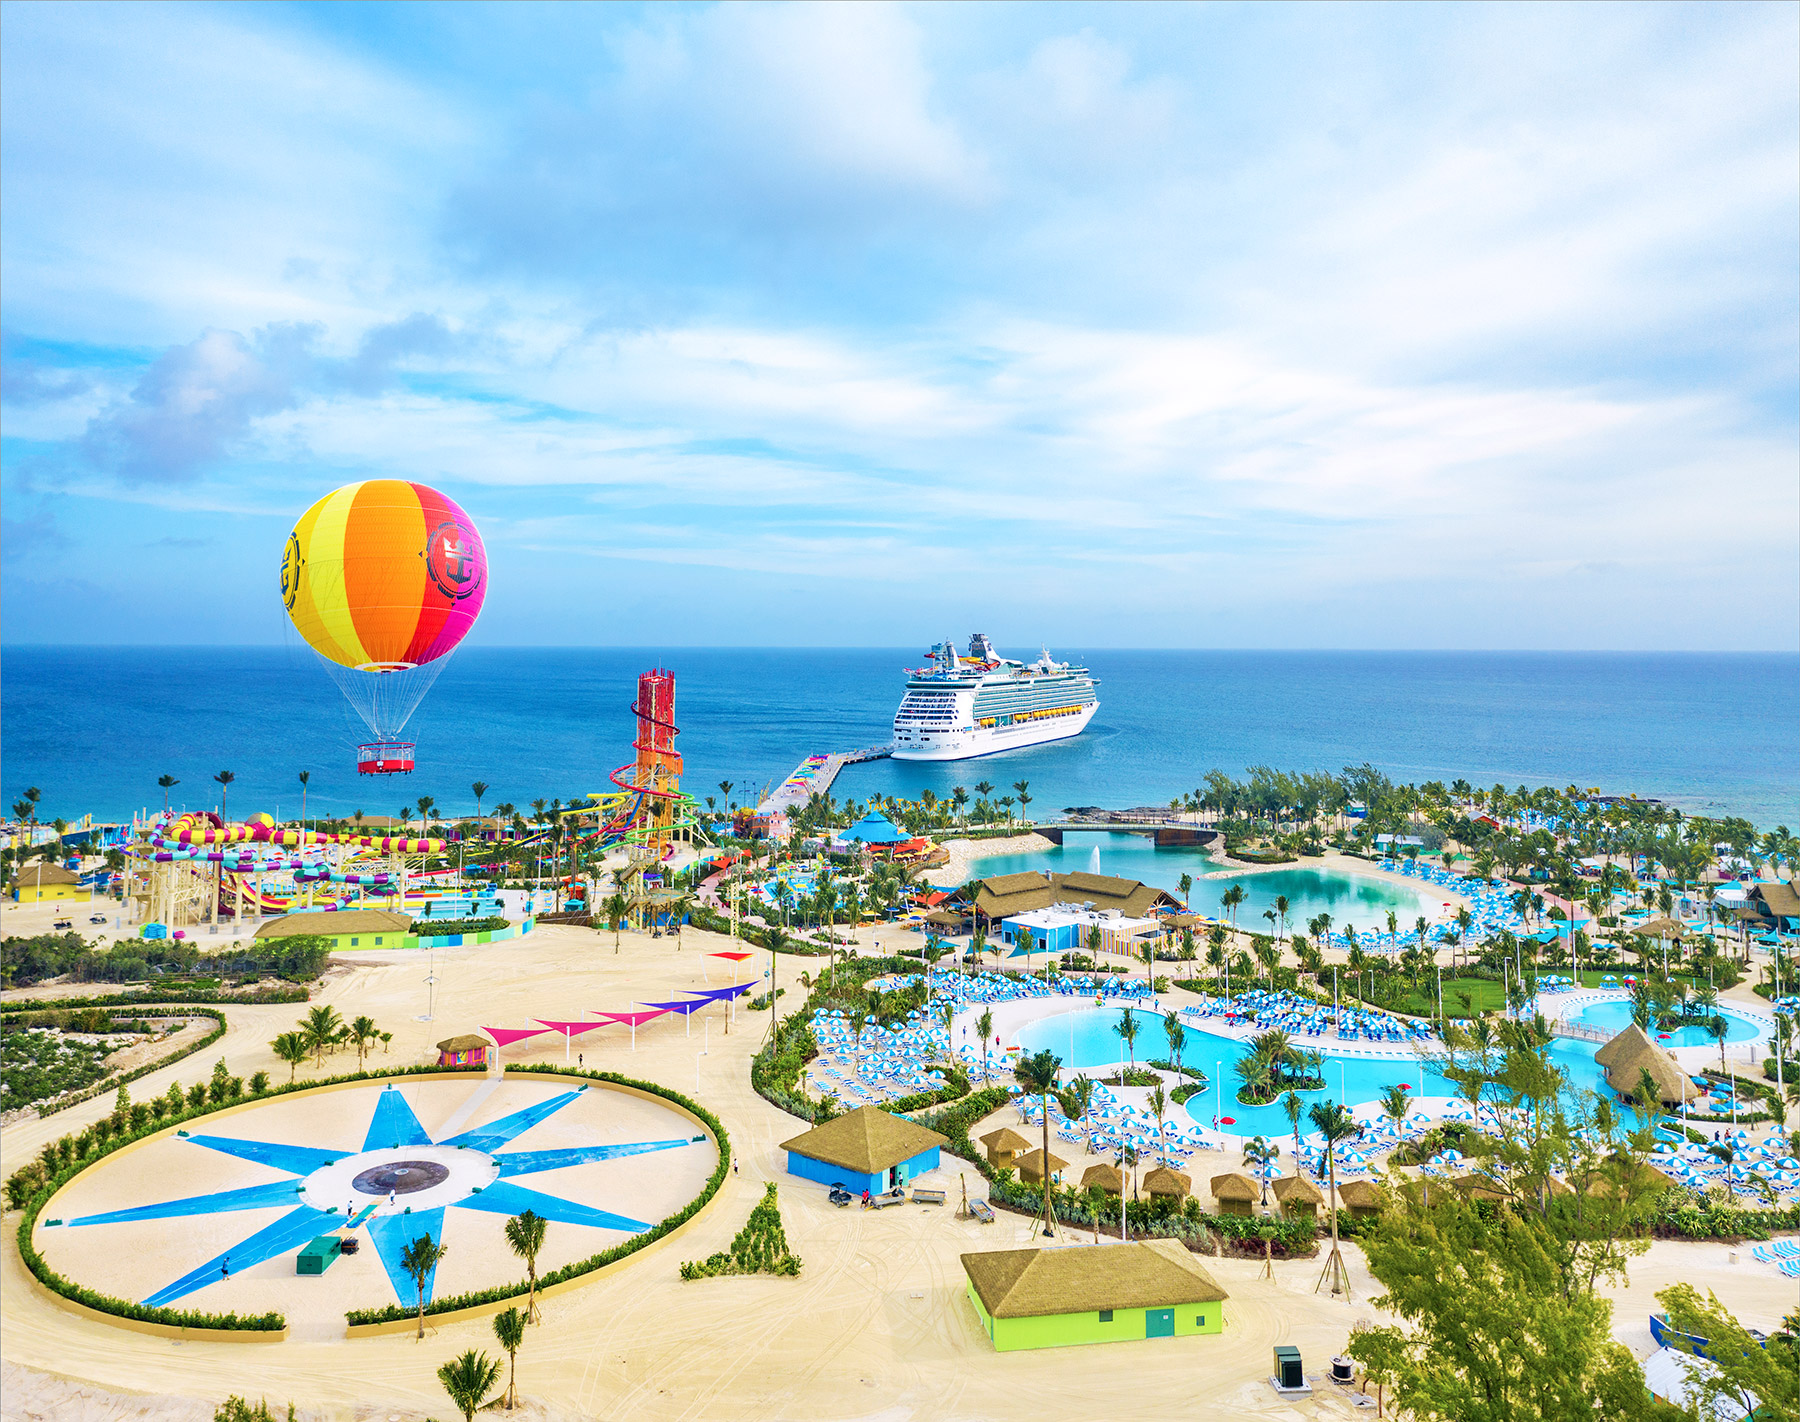 The perfect place to relax is Perfect Day at CocoCay after a hectic vacation